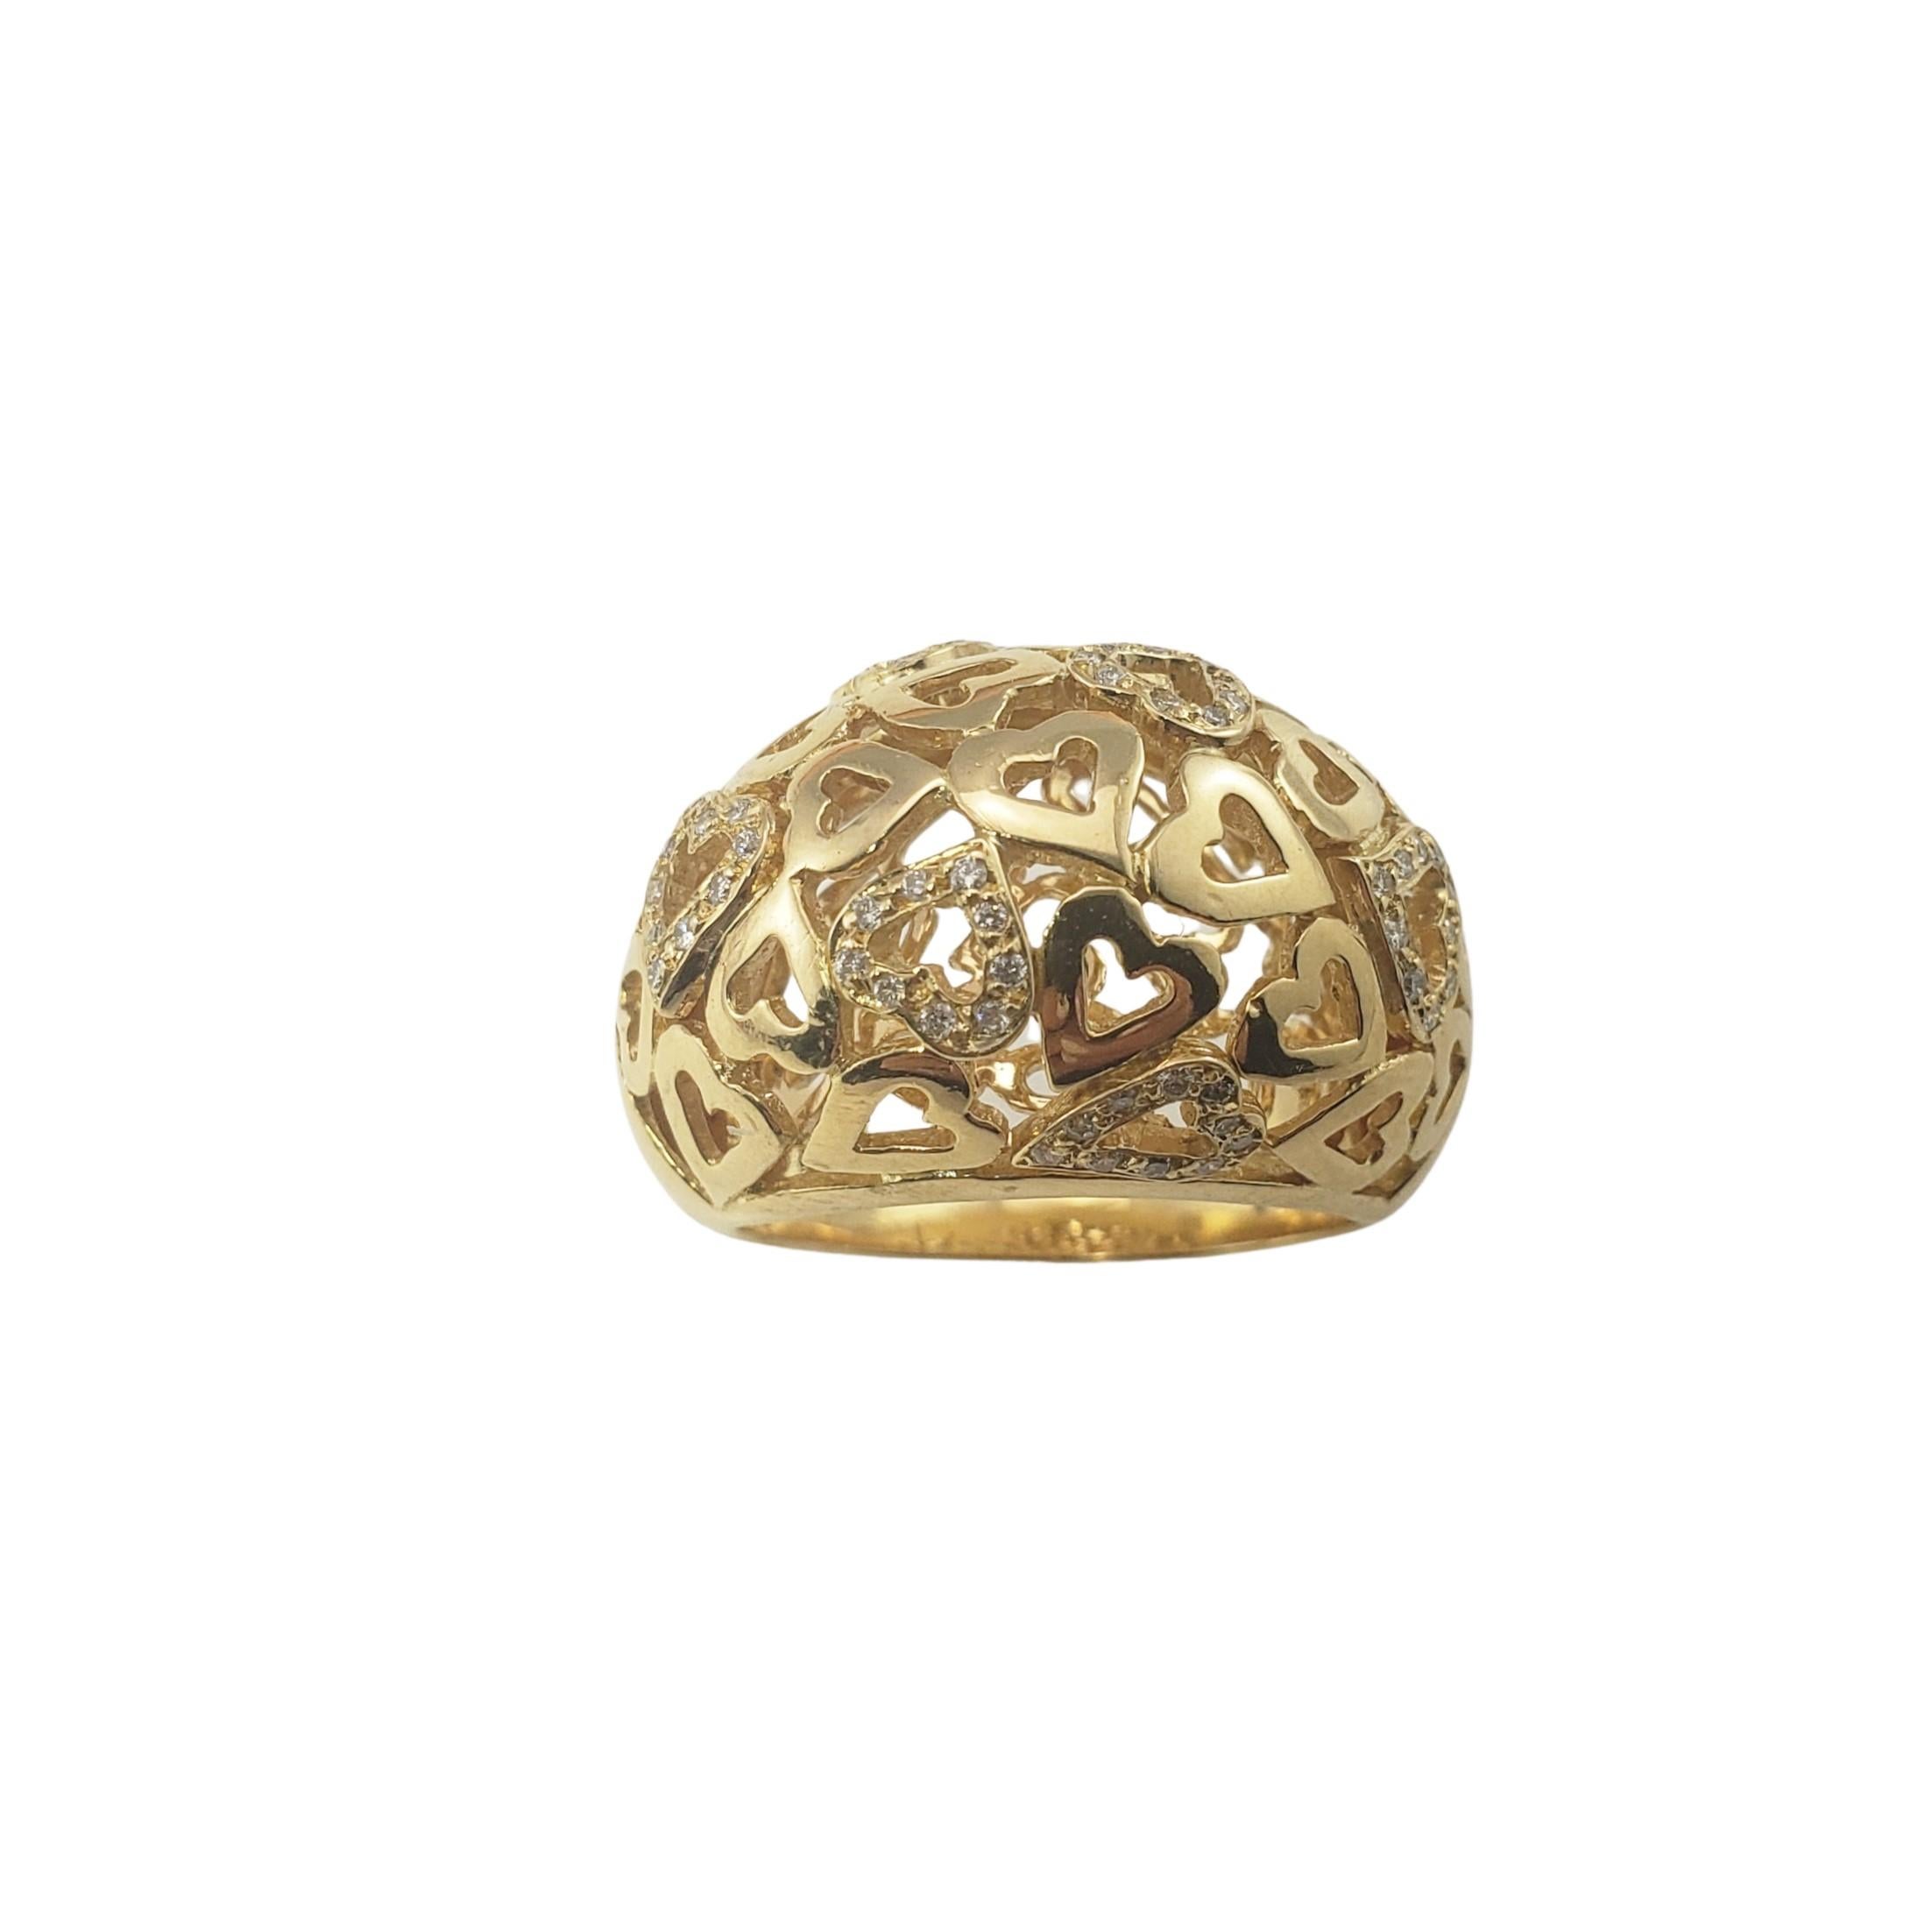 14 Karat Yellow Gold and Diamond Heart Dome Ring Size 7.25-

This lovely ring features 57 round brilliant cut diamonds set in a stunning heart design.  Width:  16 mm.  Shank:  4 mm.
Height:  10 mm.

Approximate total diamond weight:   .28